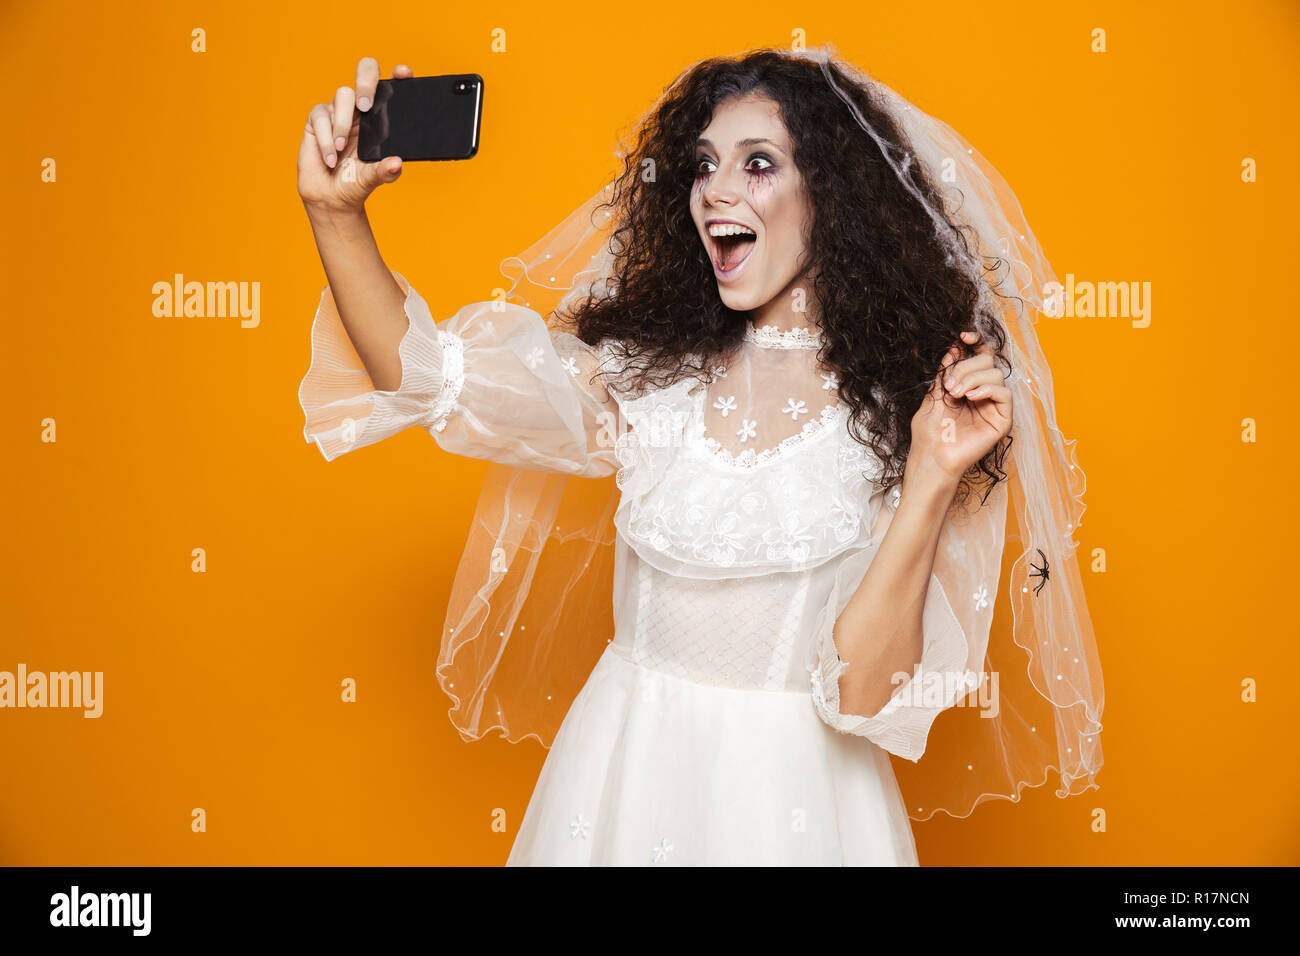 Image of horrifying bride zombie on halloween wearing wedding dress and scary makeup taking selfie on mobile phone isolated over yellow background Stock Photo